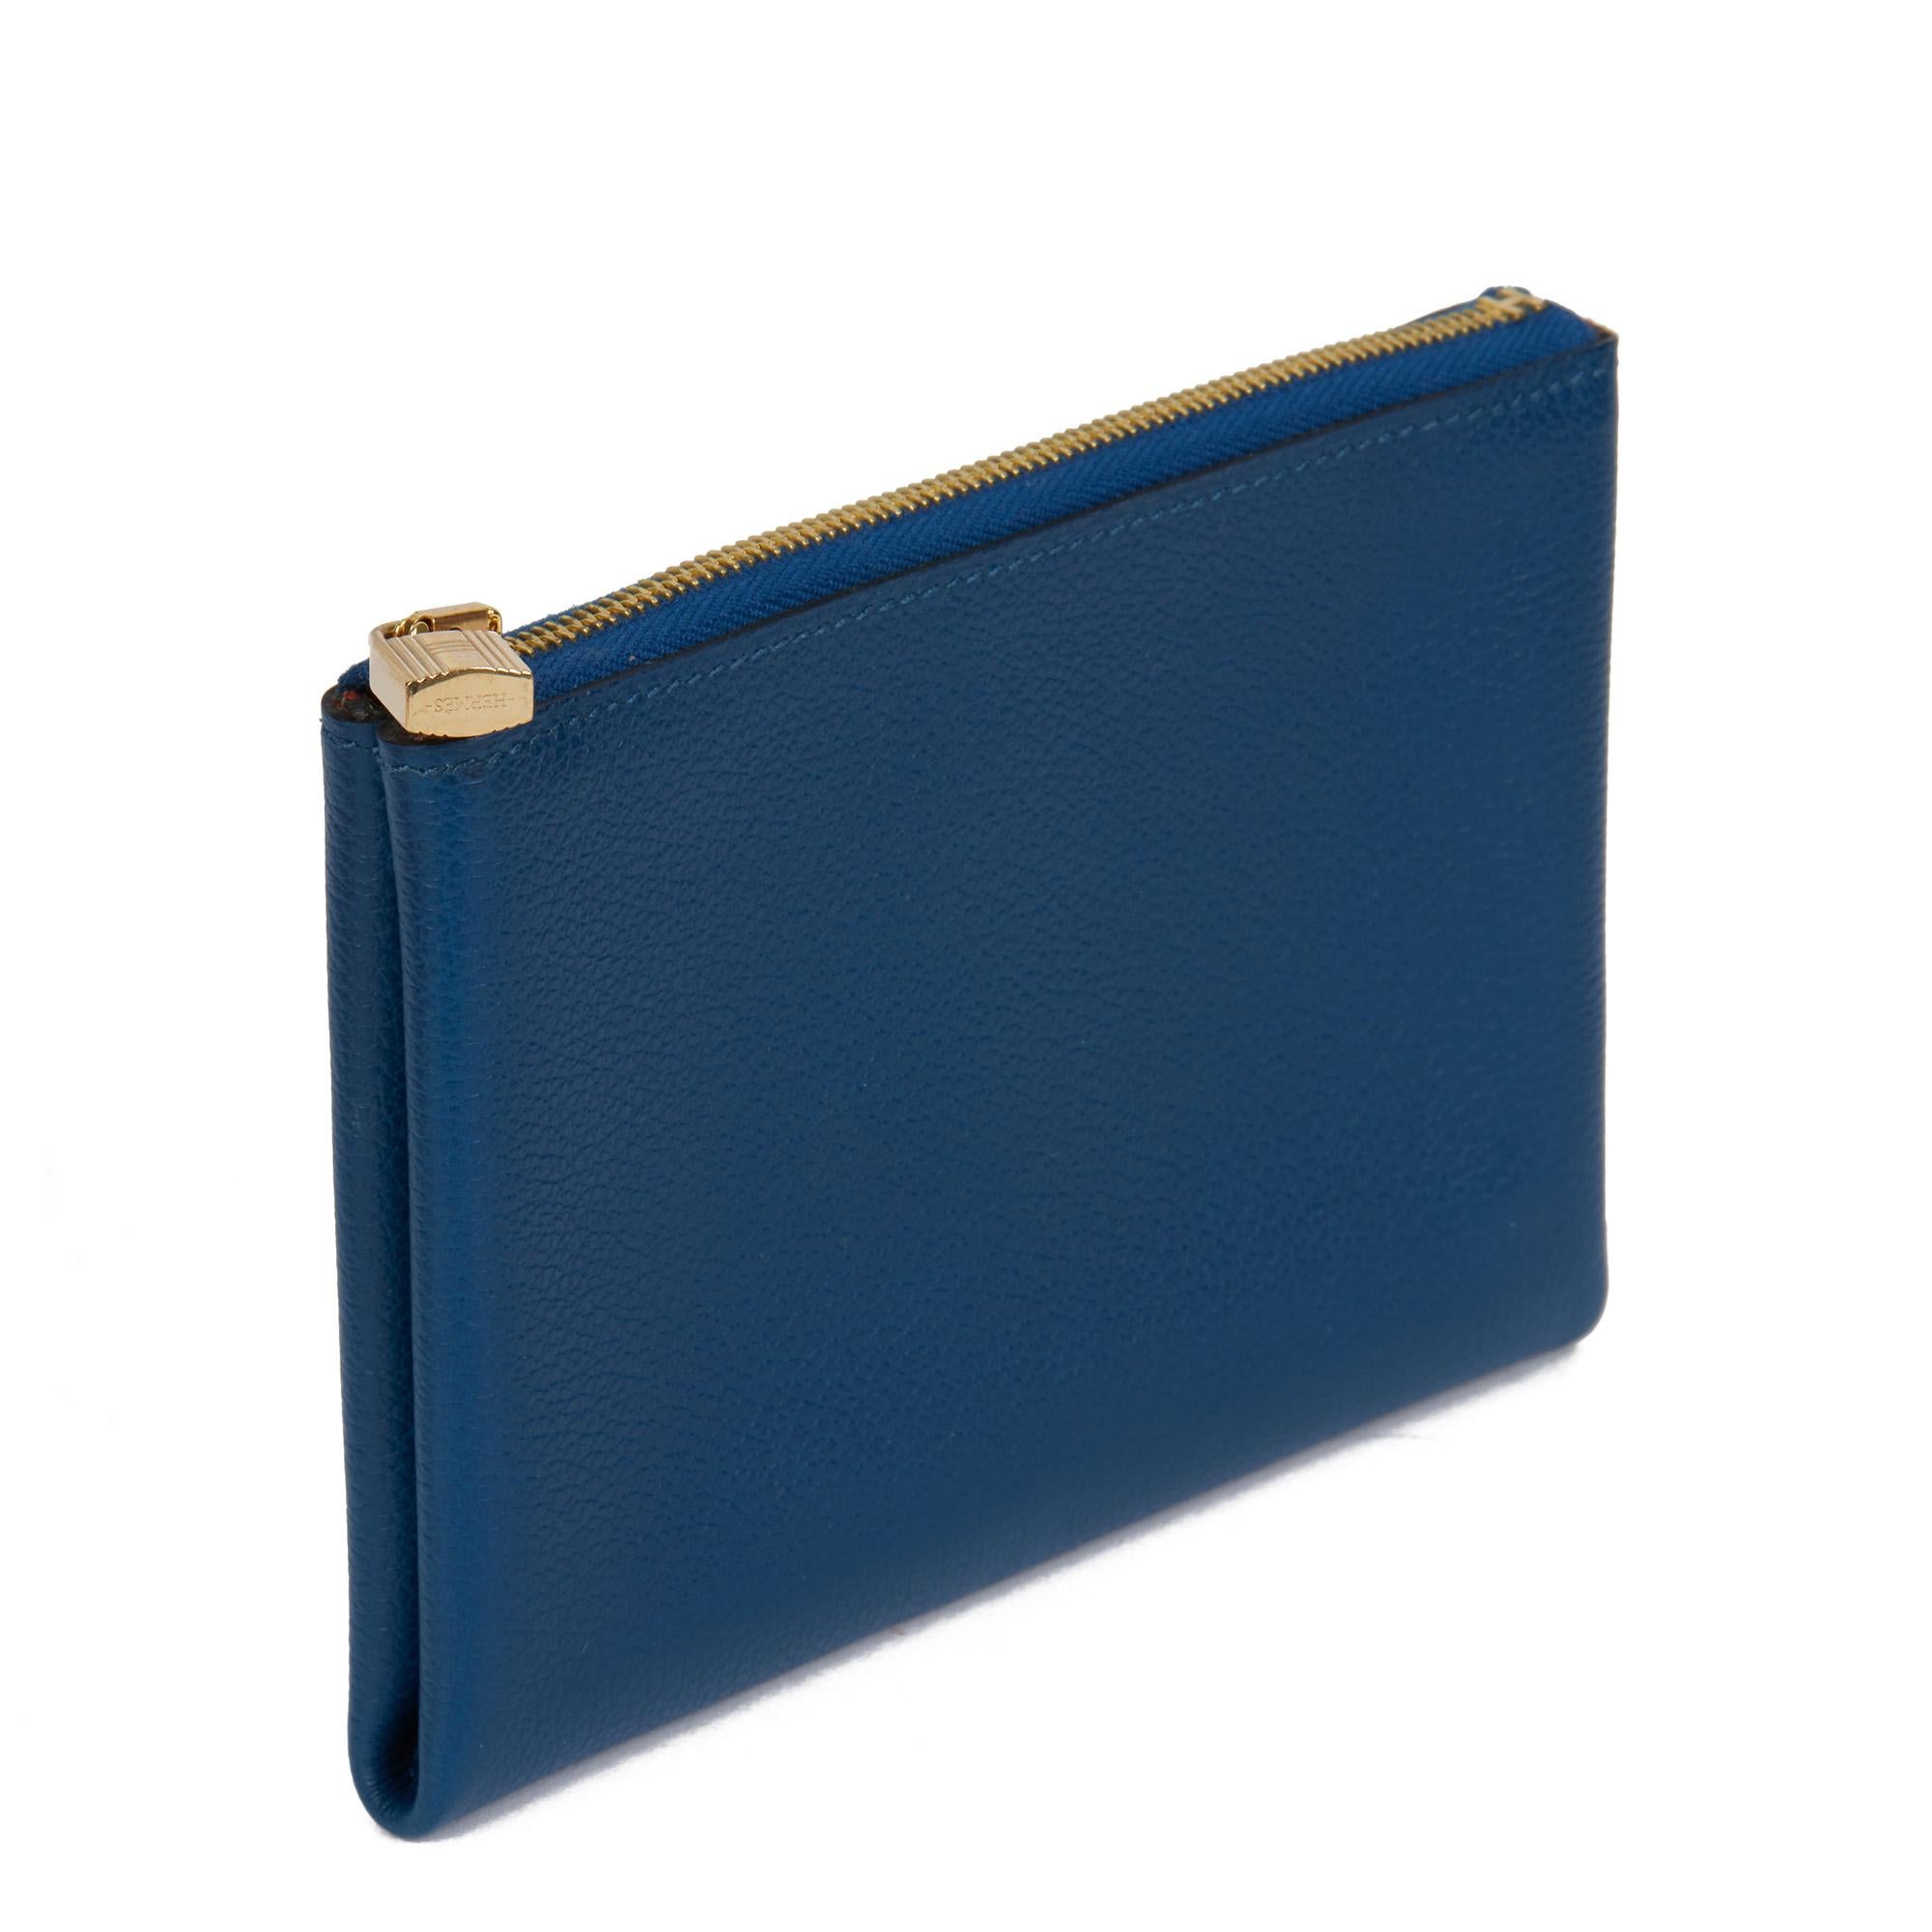 Hermès BLEU DE PRESSE & BRIQUE VERSO ATOUT 14

CONDITION NOTES
The exterior is in exceptional condition with minimal signs of use.
The interior is in exceptional condition with minimal signs of use.
The hardware is in exceptional condition with